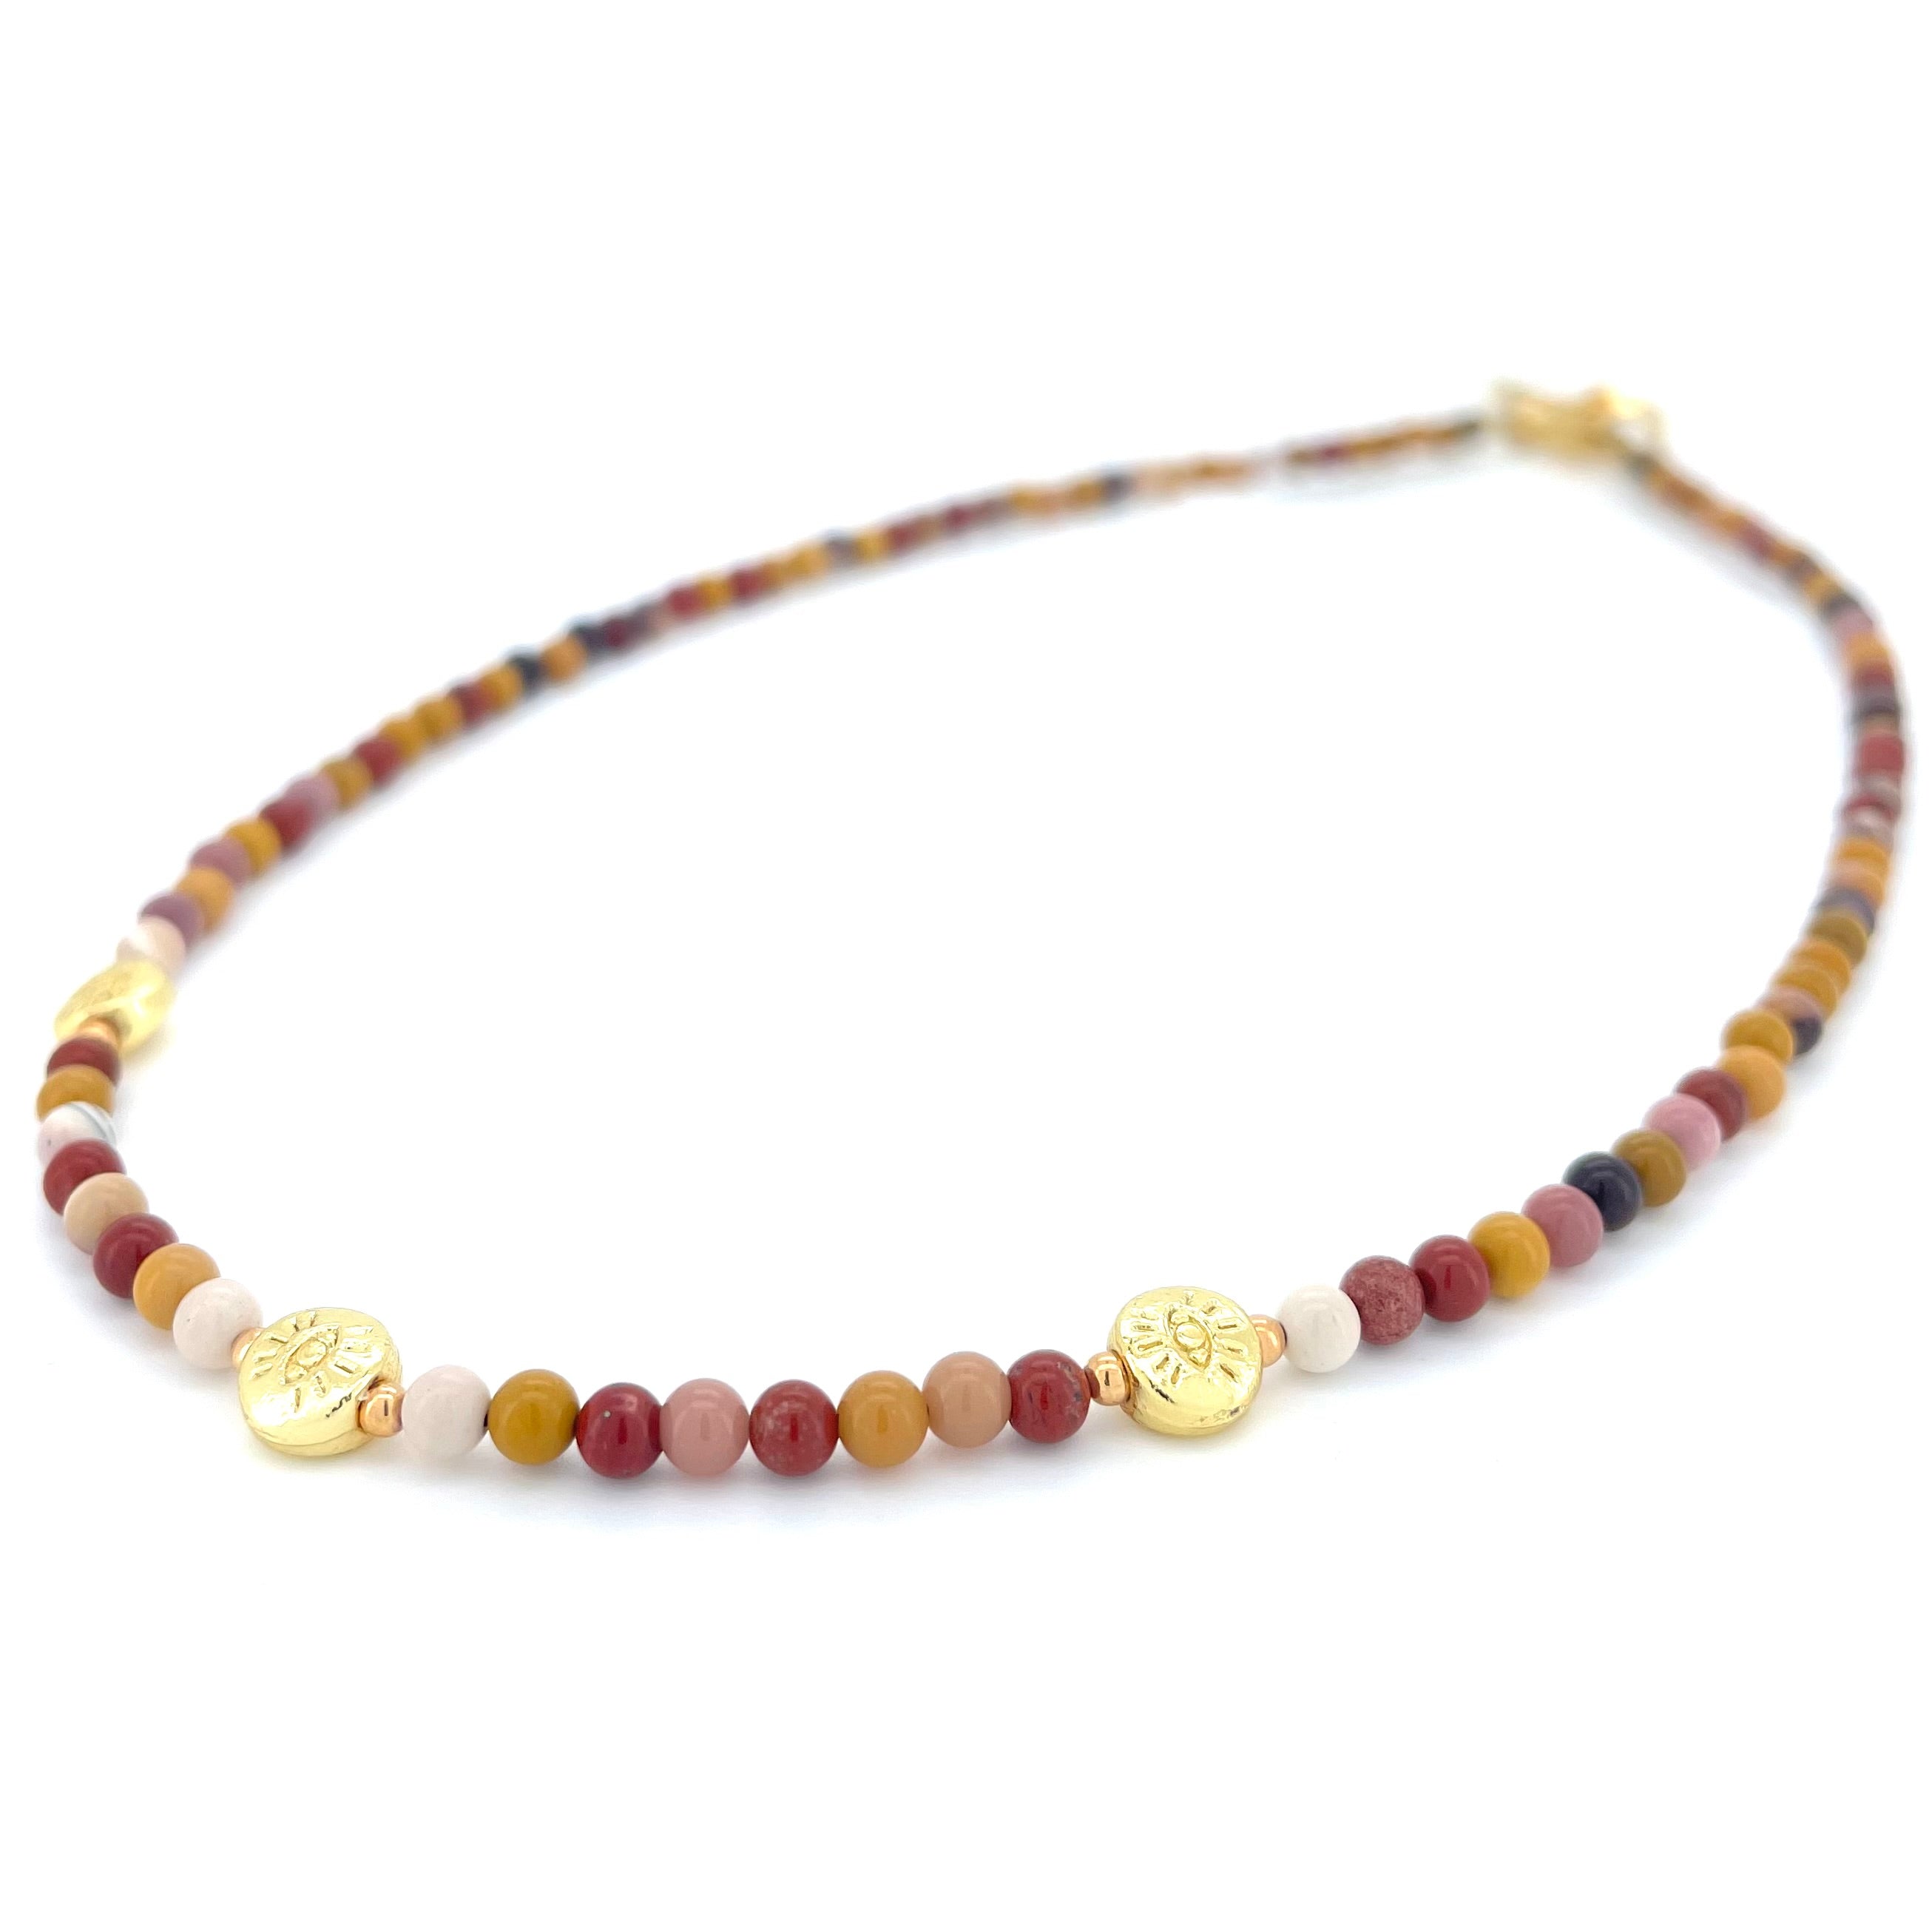 THE DAINTY- EYES- Mookaite- NECKLACE - Headless Nation